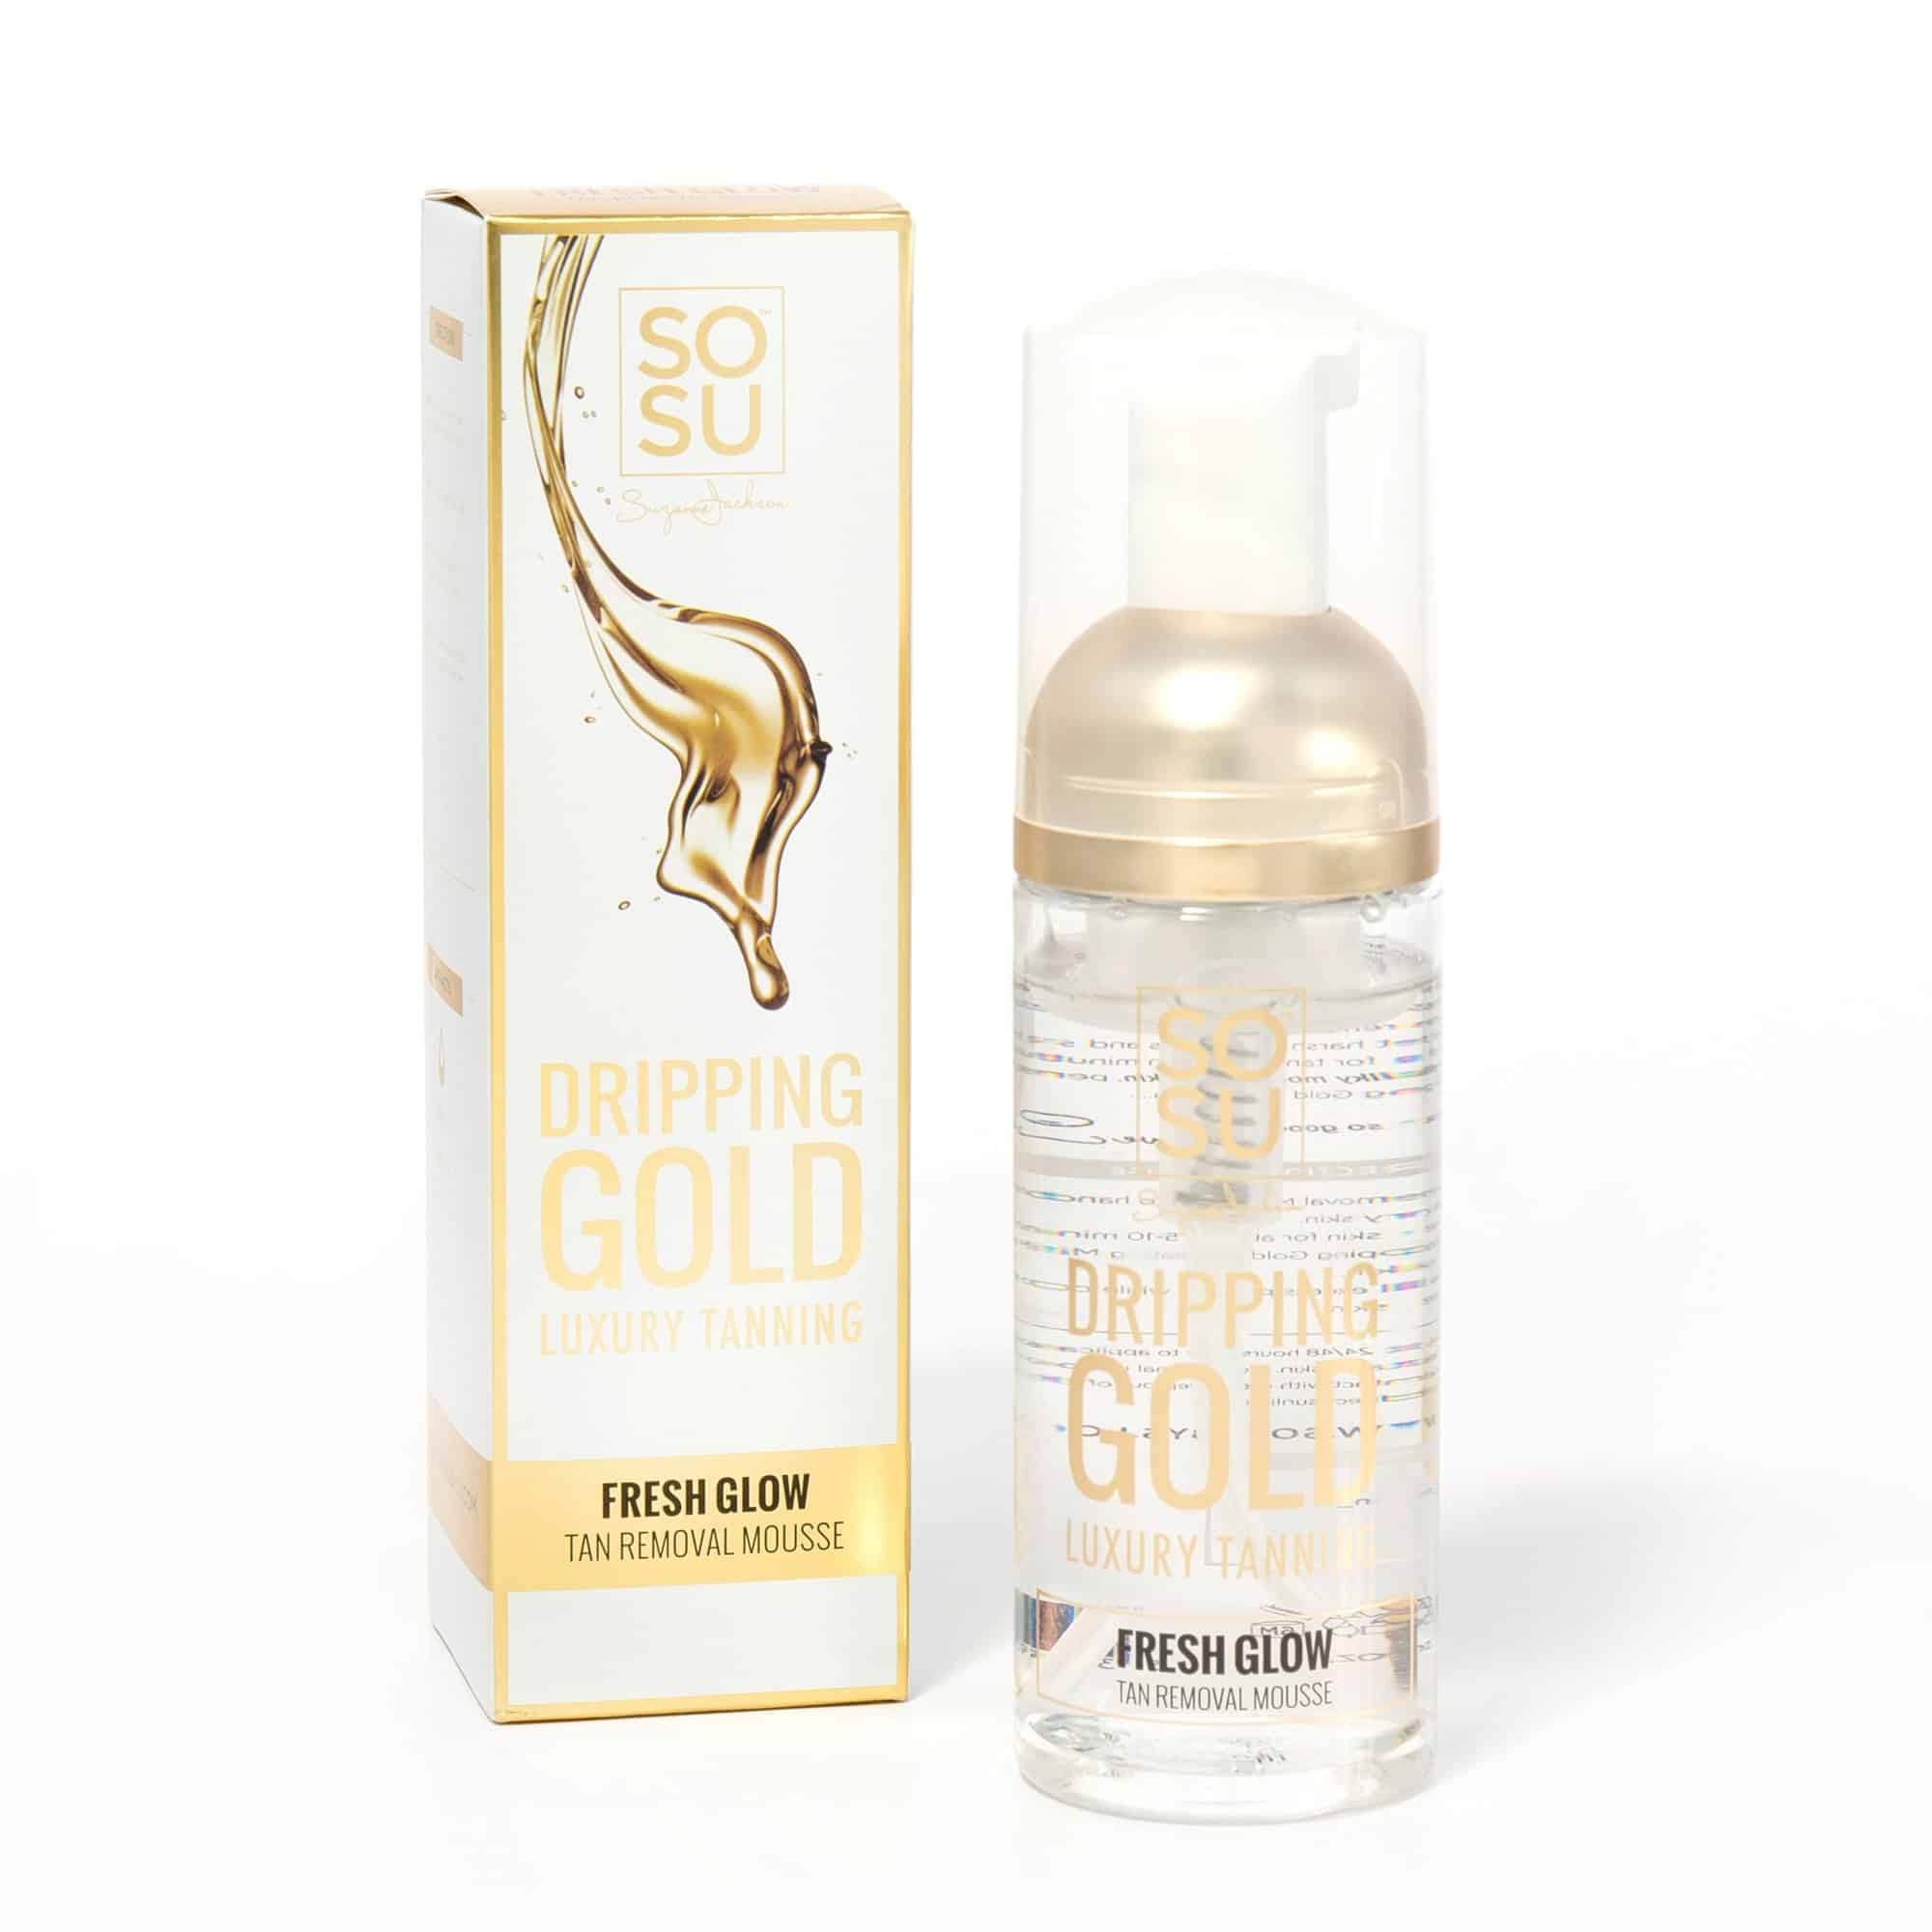 SOSU Tanning Removal Mousse